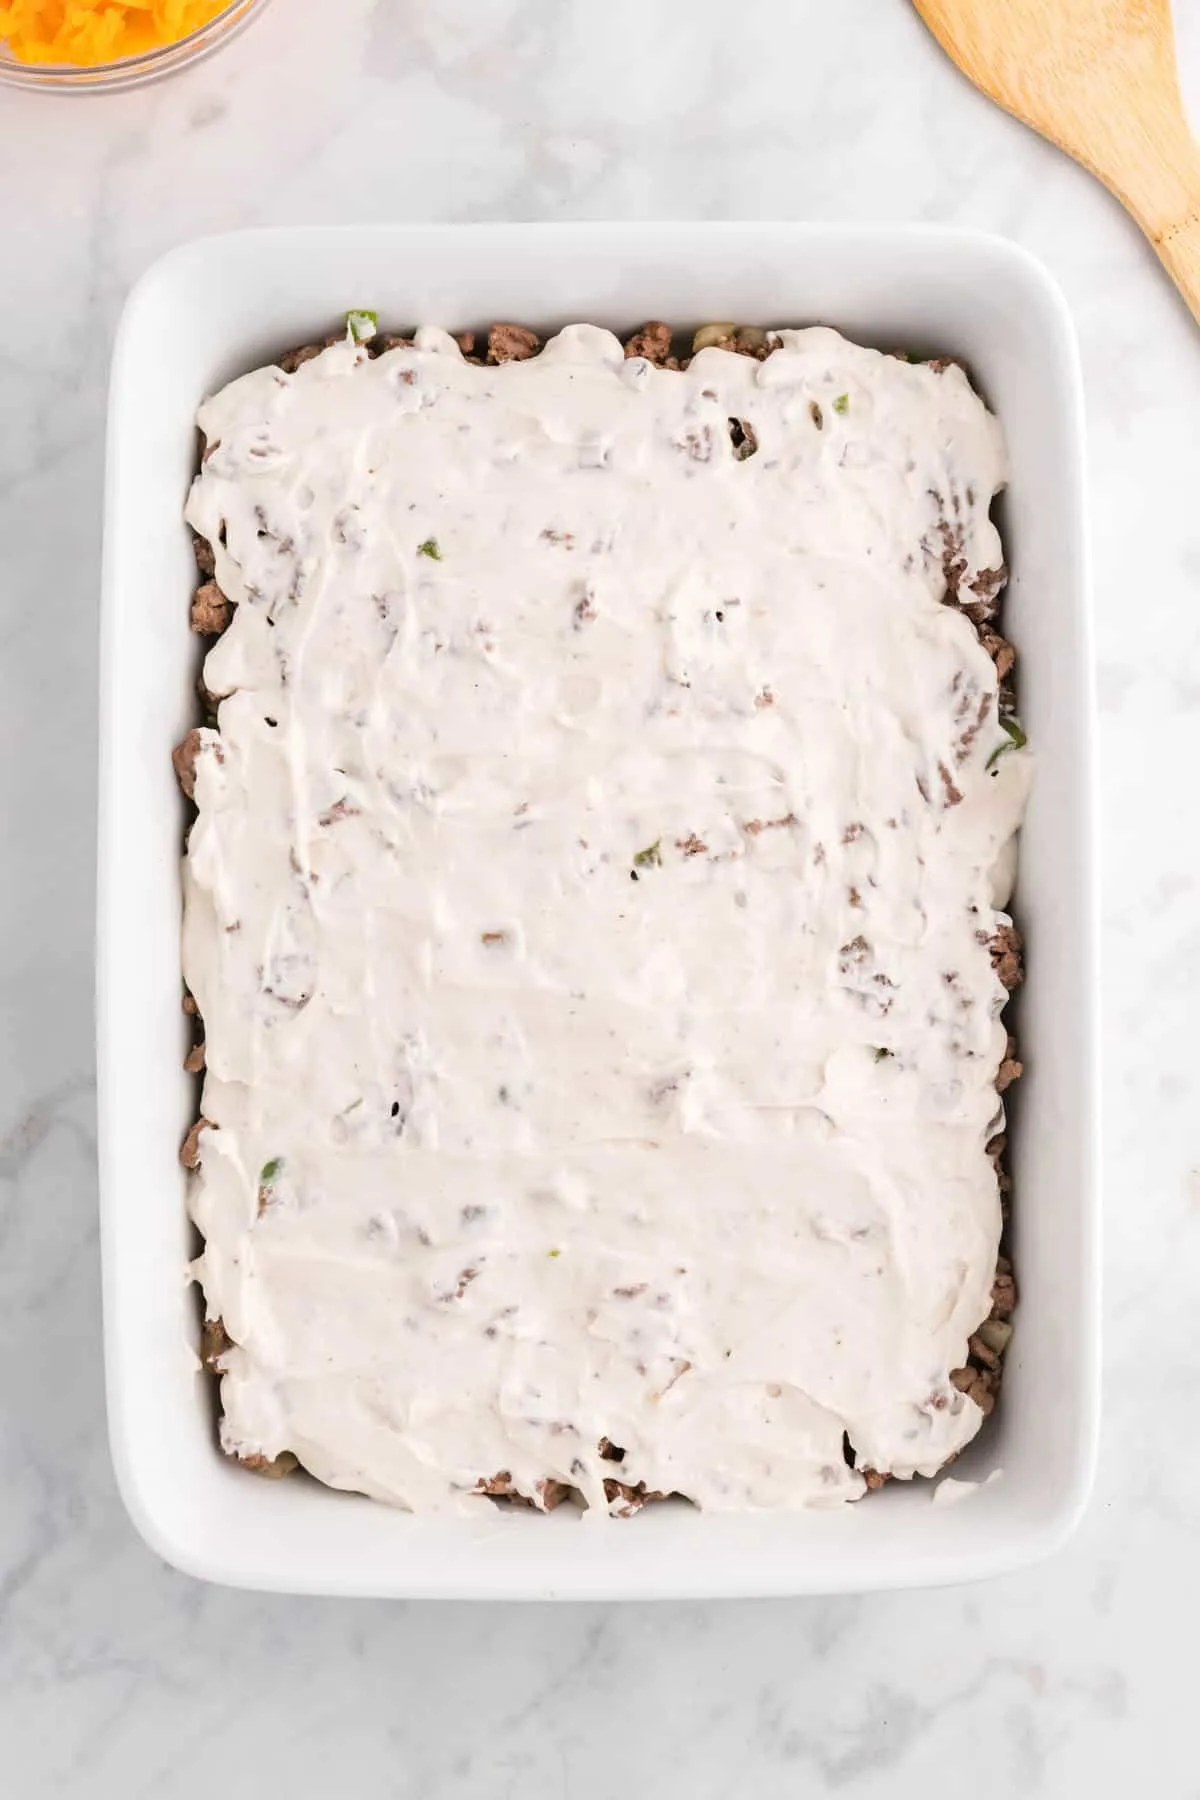 sour cream and cream of mushroom soup mixture spread over ground beef in a baking dish